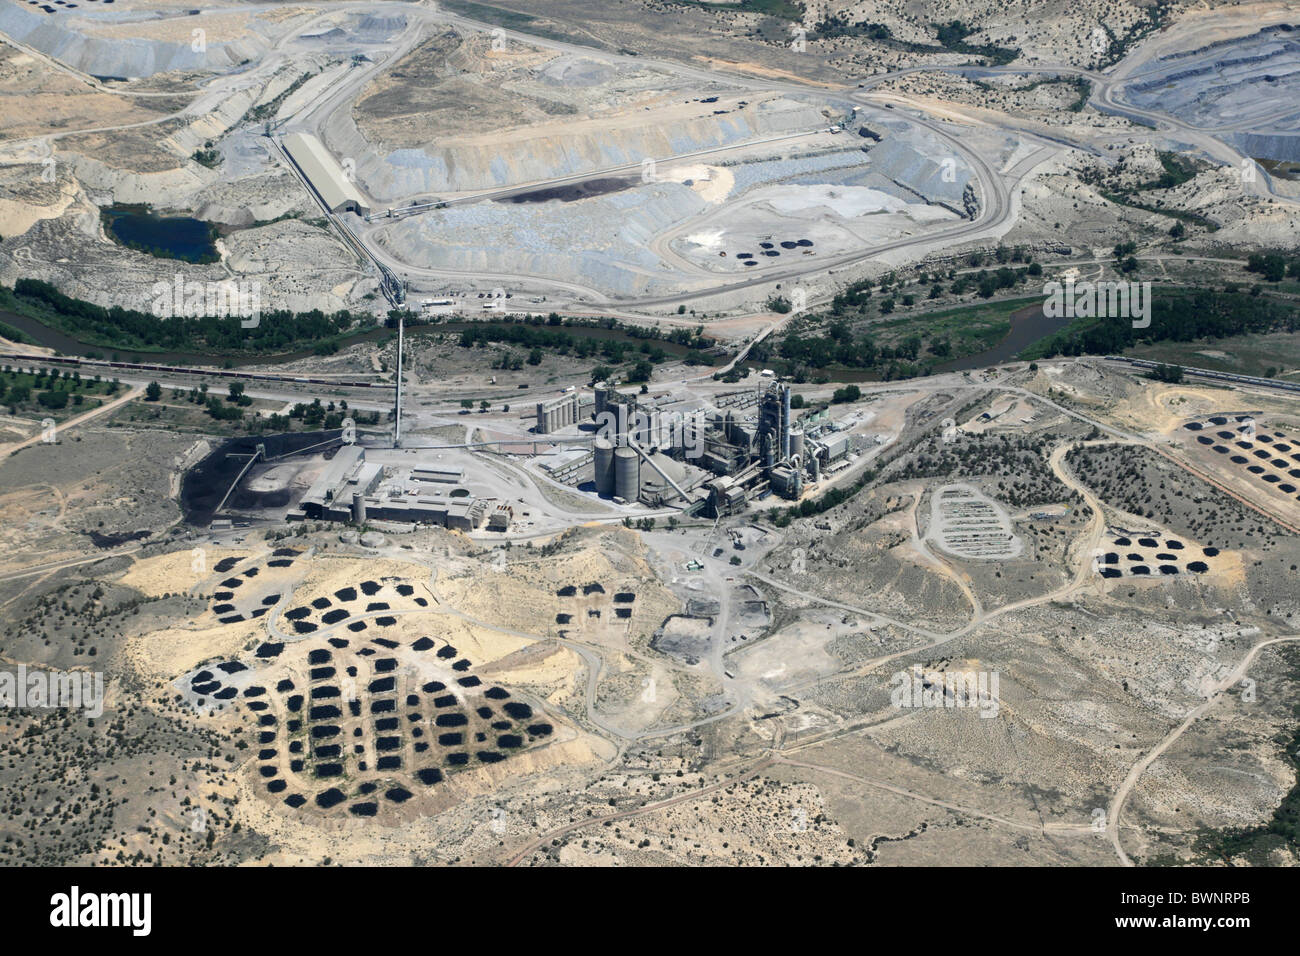 aerial image of Colorado cement factory with piles of waste tires to be incinerated Stock Photo